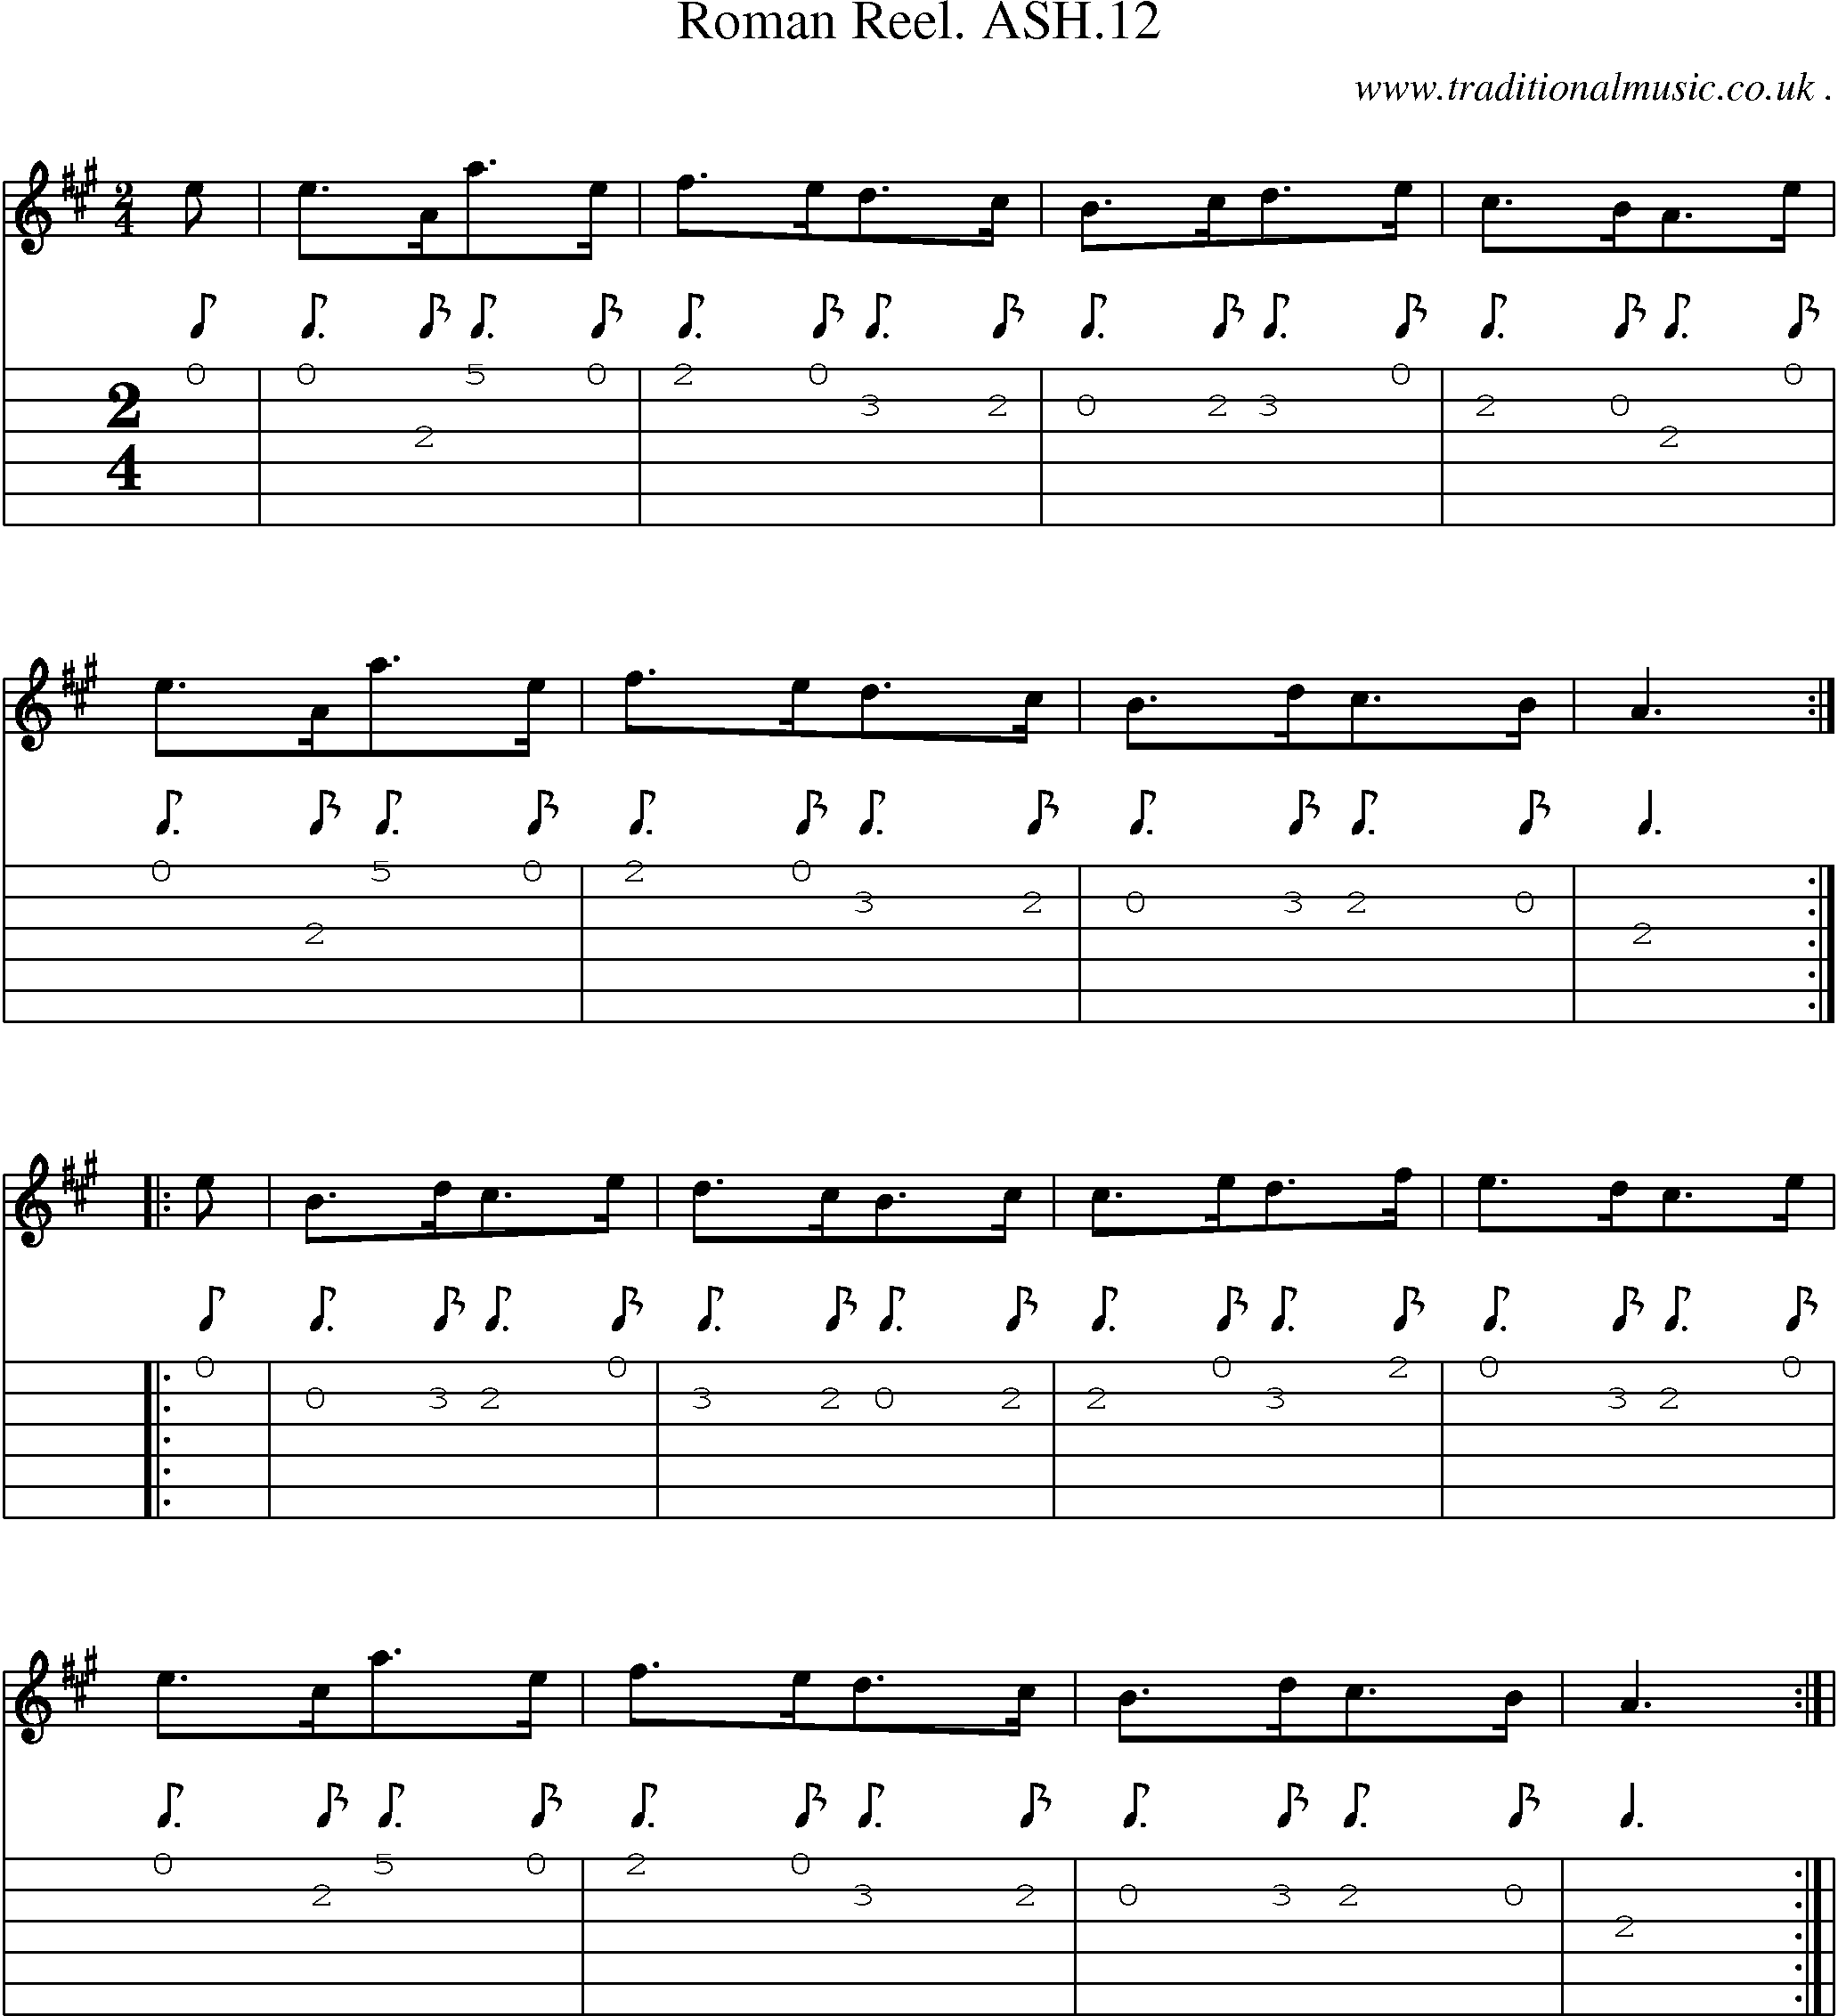 Sheet-Music and Guitar Tabs for Roman Reel Ash12